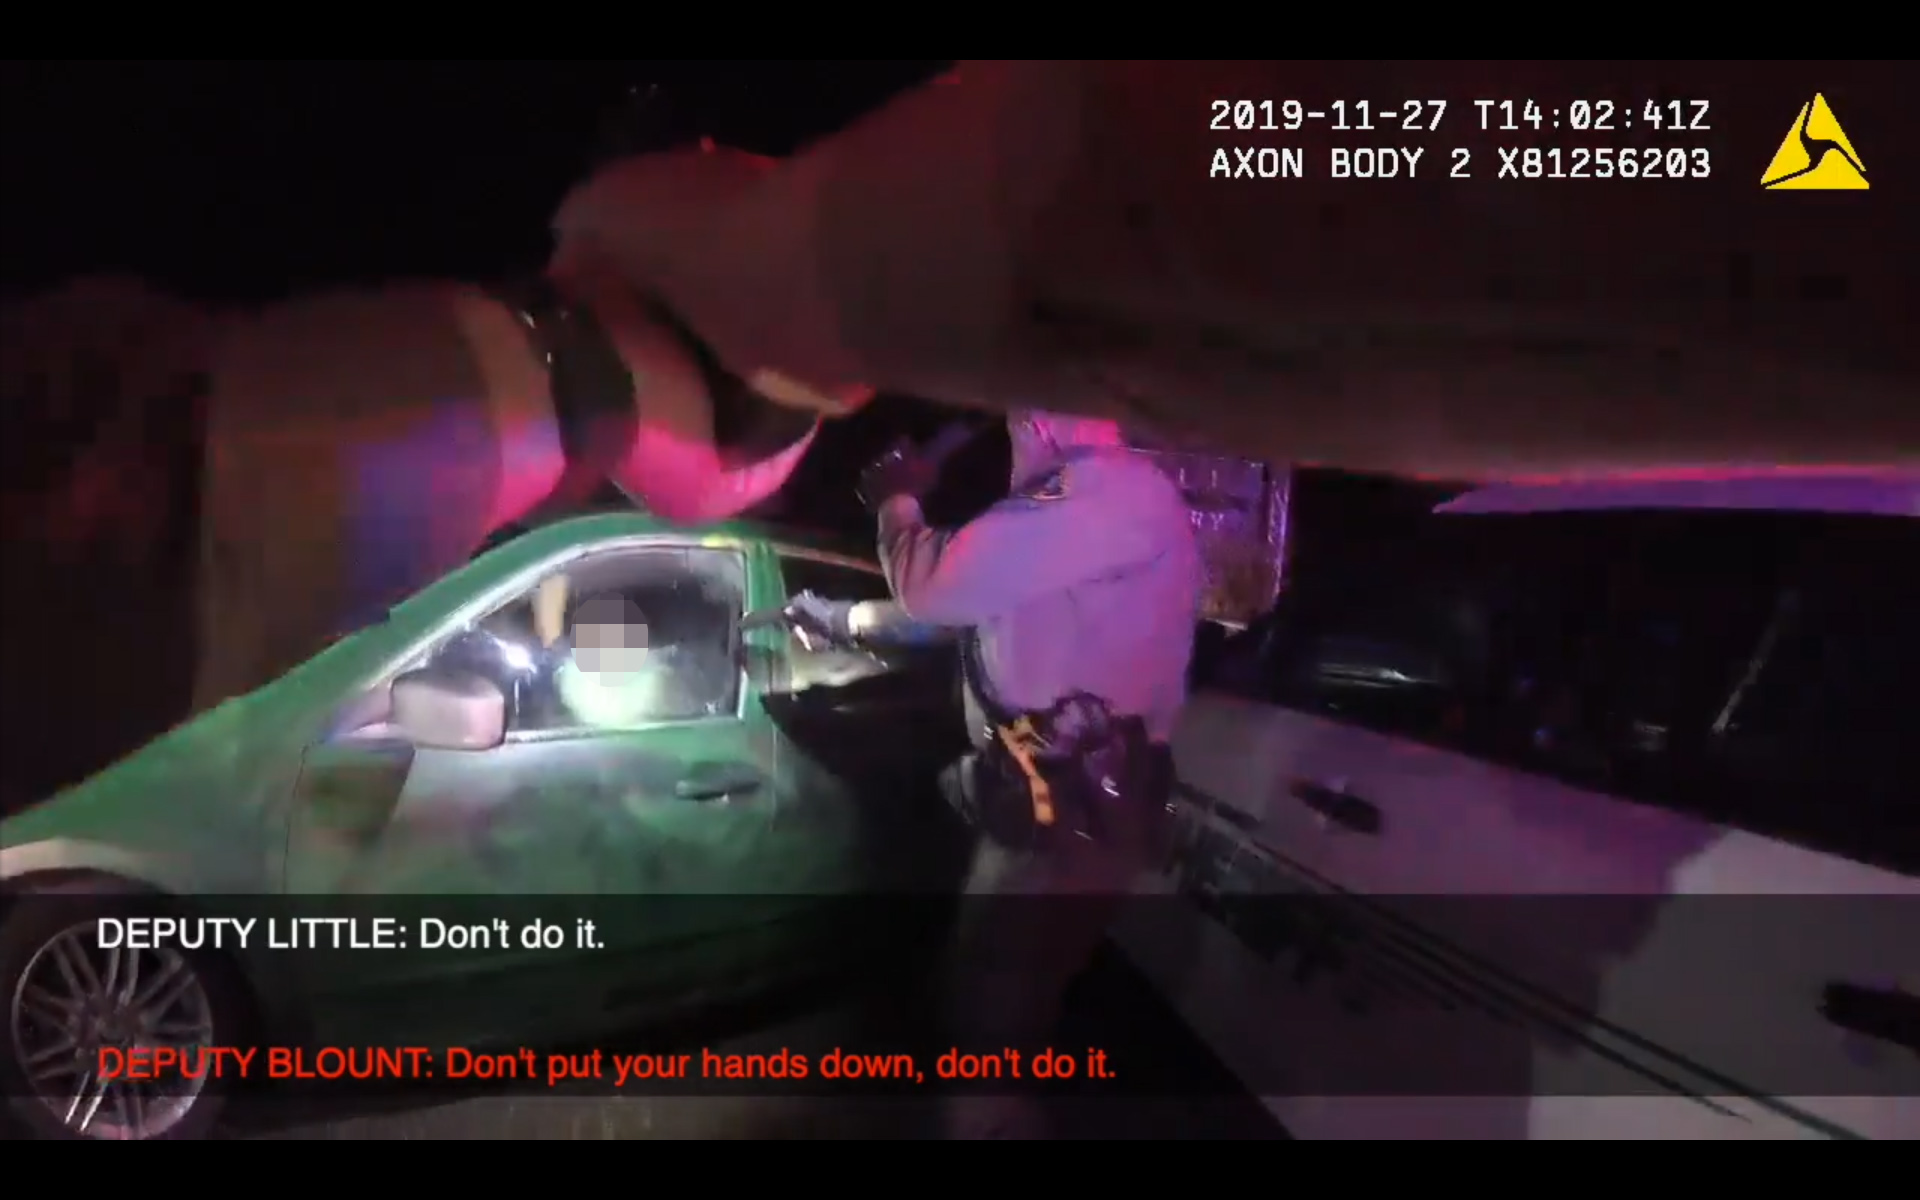 PHOTO: Body camera footage released by the Sonoma Sheriff in Northern California shows Sonoma County Deputies taking David Ward into custody on Nov. 28, 2019.